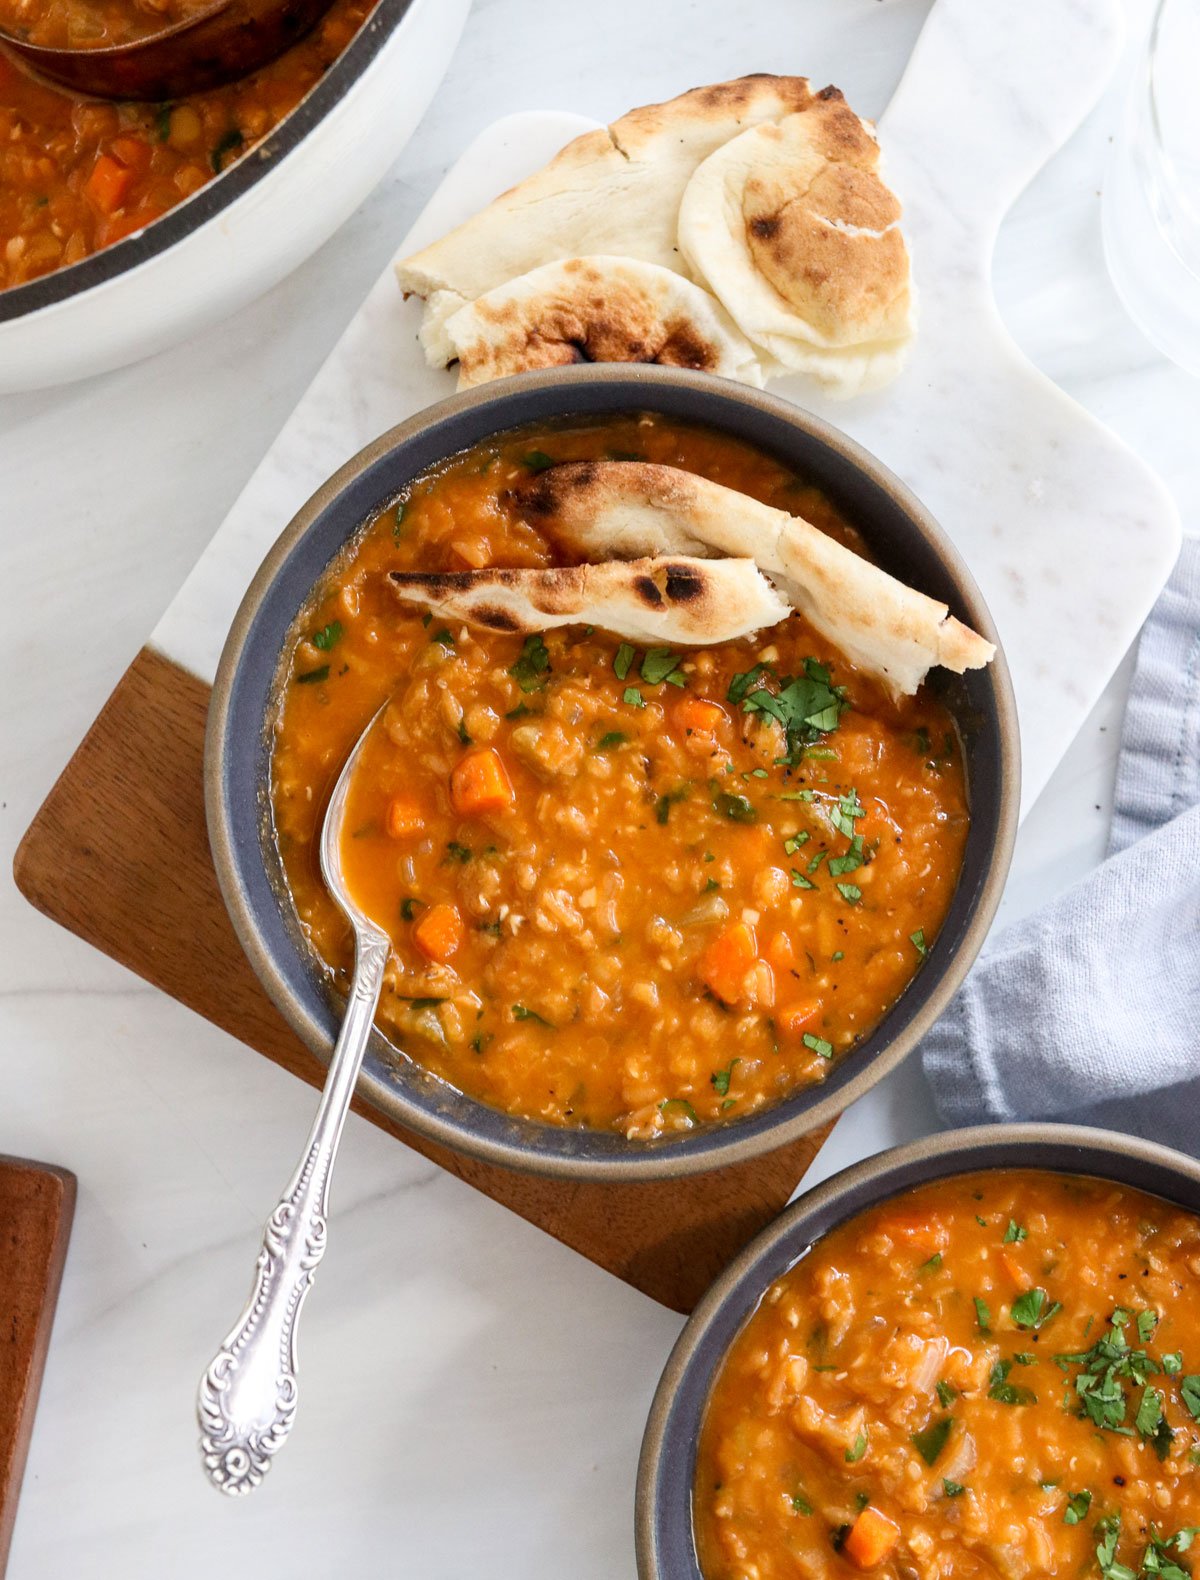 red lentil soup served with naan bread.